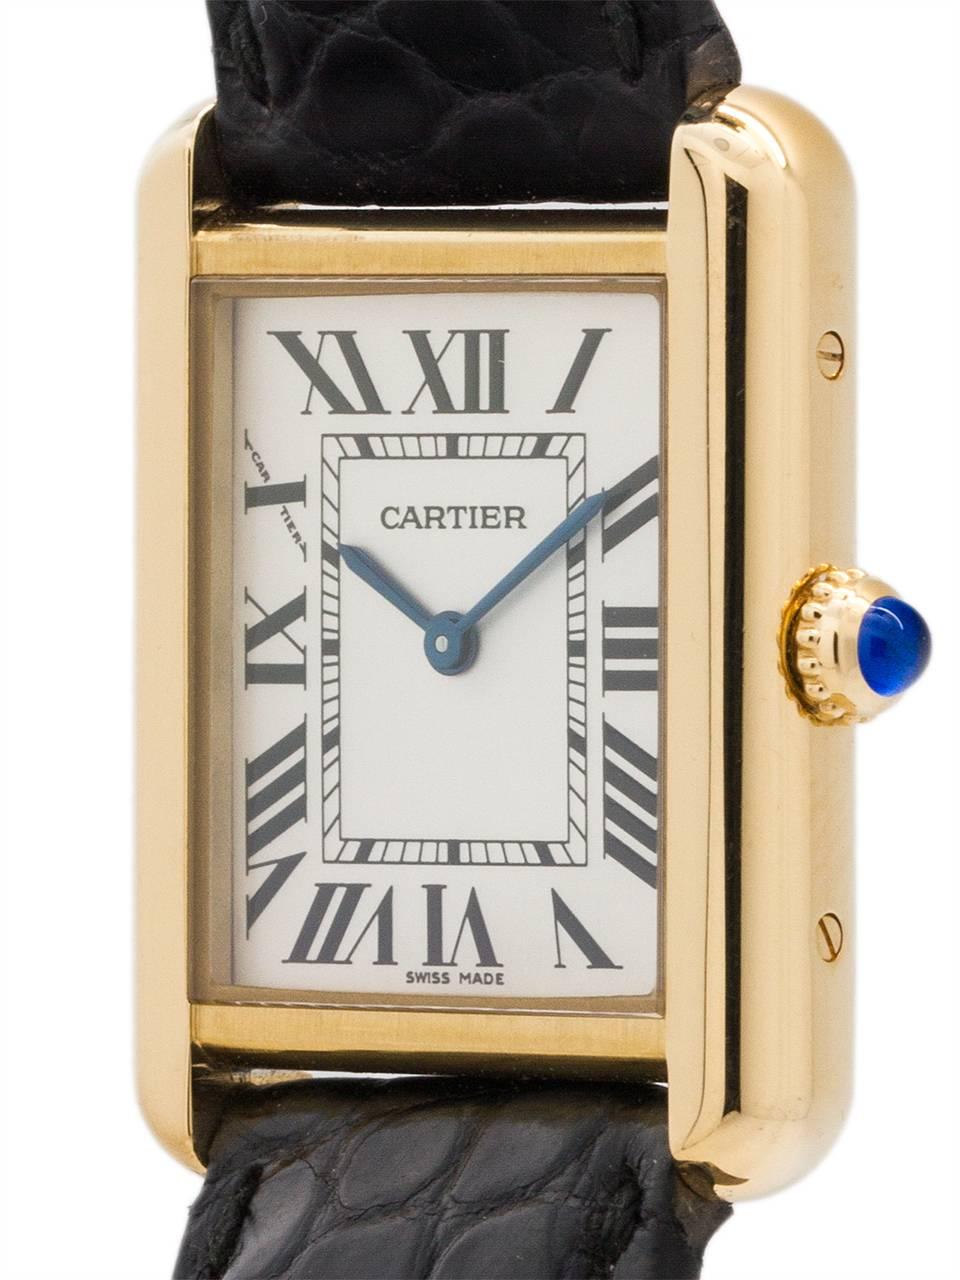 
Lady’s midsize Cartier 18K YG Tank Solo ref 2743, solid 18K YG gold top and stainless steel back secured by 4 side and 4 case back screws. Featuring 24 X 31mm case with scratch resistant sapphire crystal, cabochon sapphire crown, and silver opaline